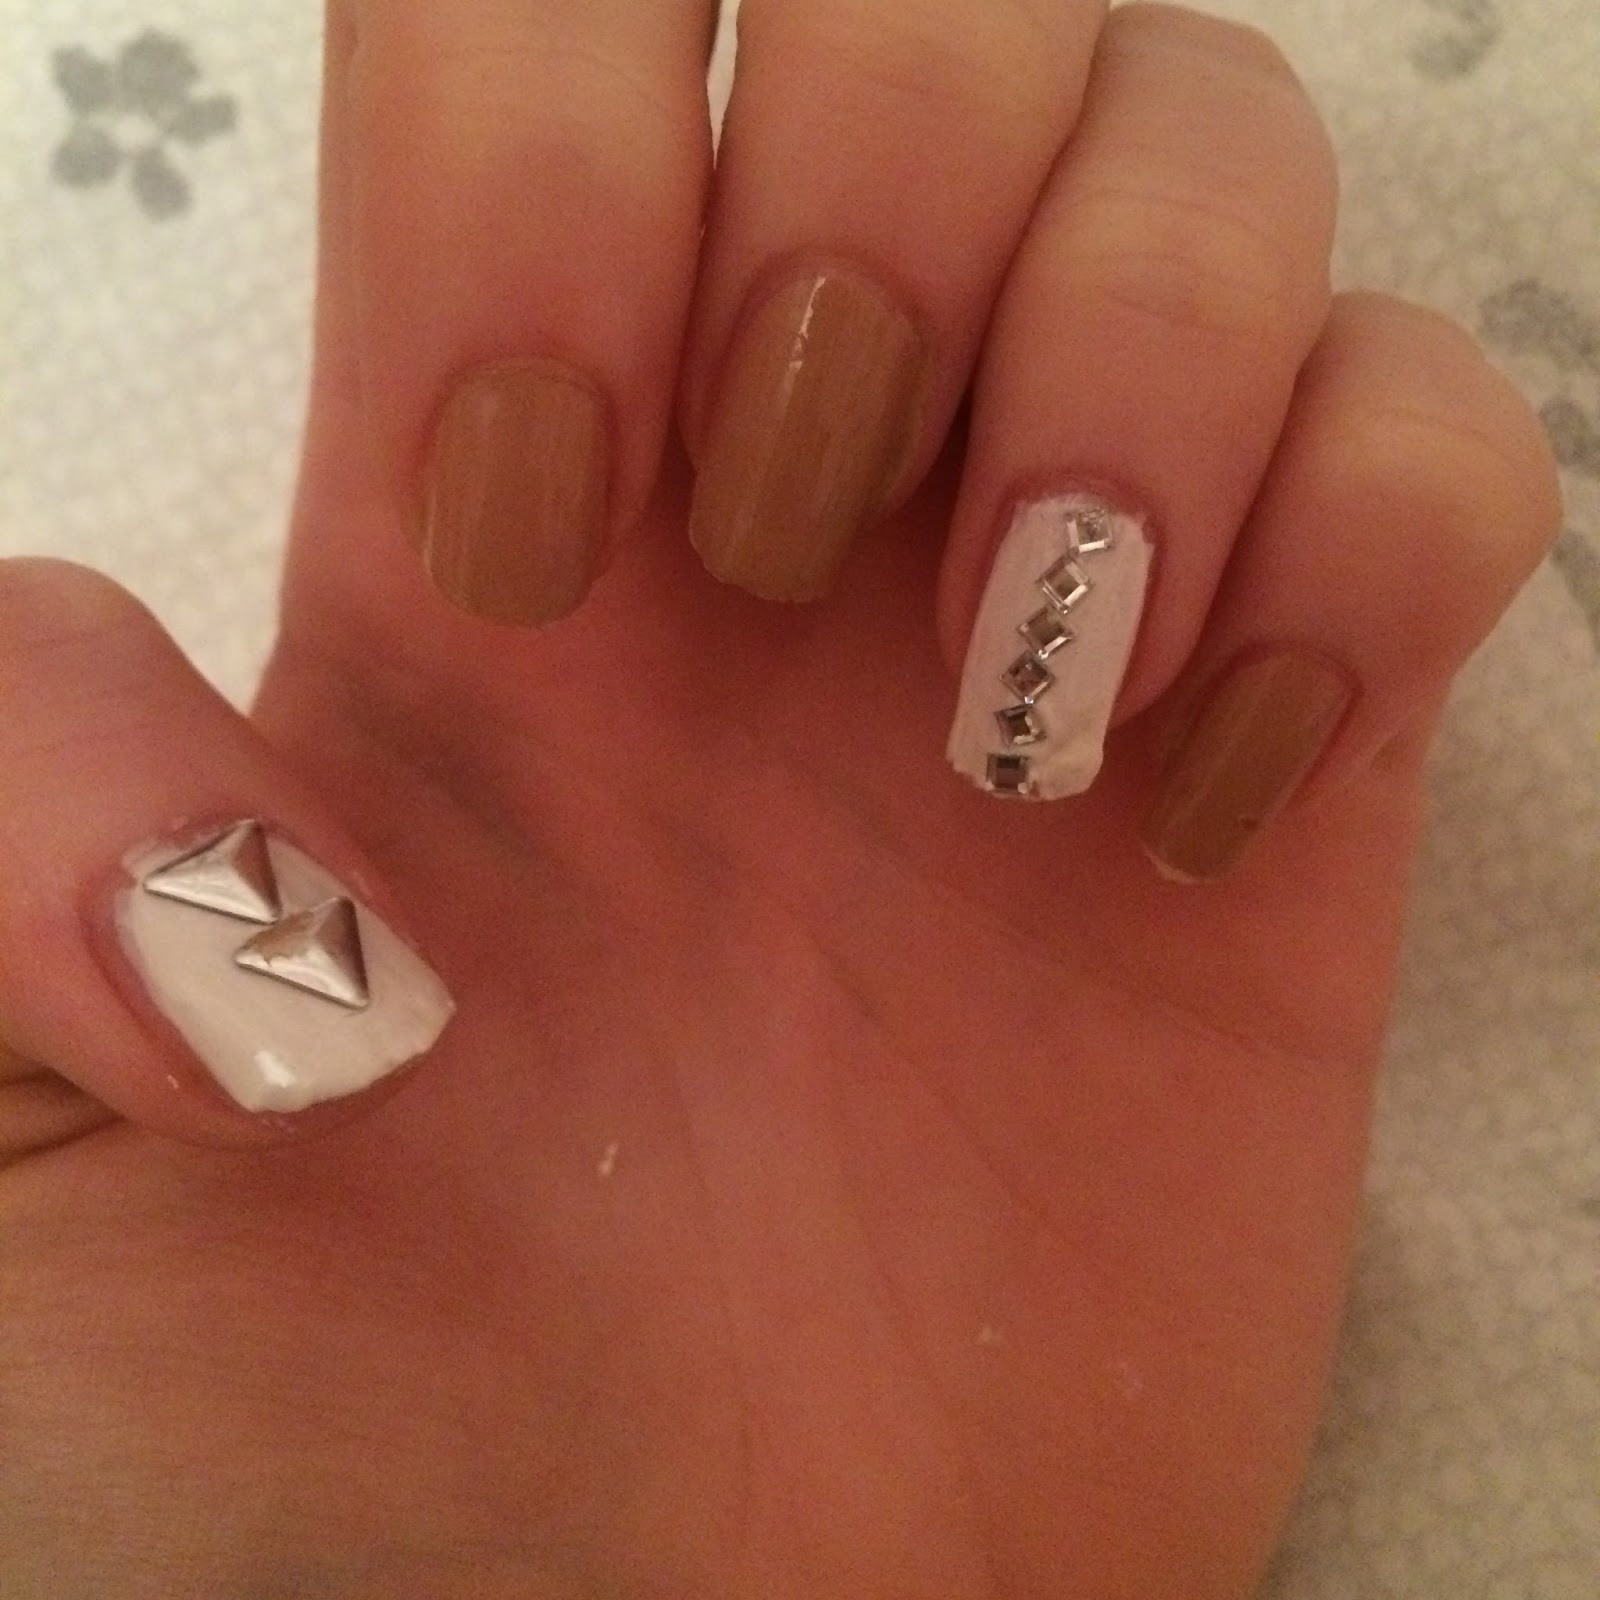 Sophisticated Nail Art
 Blondxzilla Simple and Sophisticated Nail Art